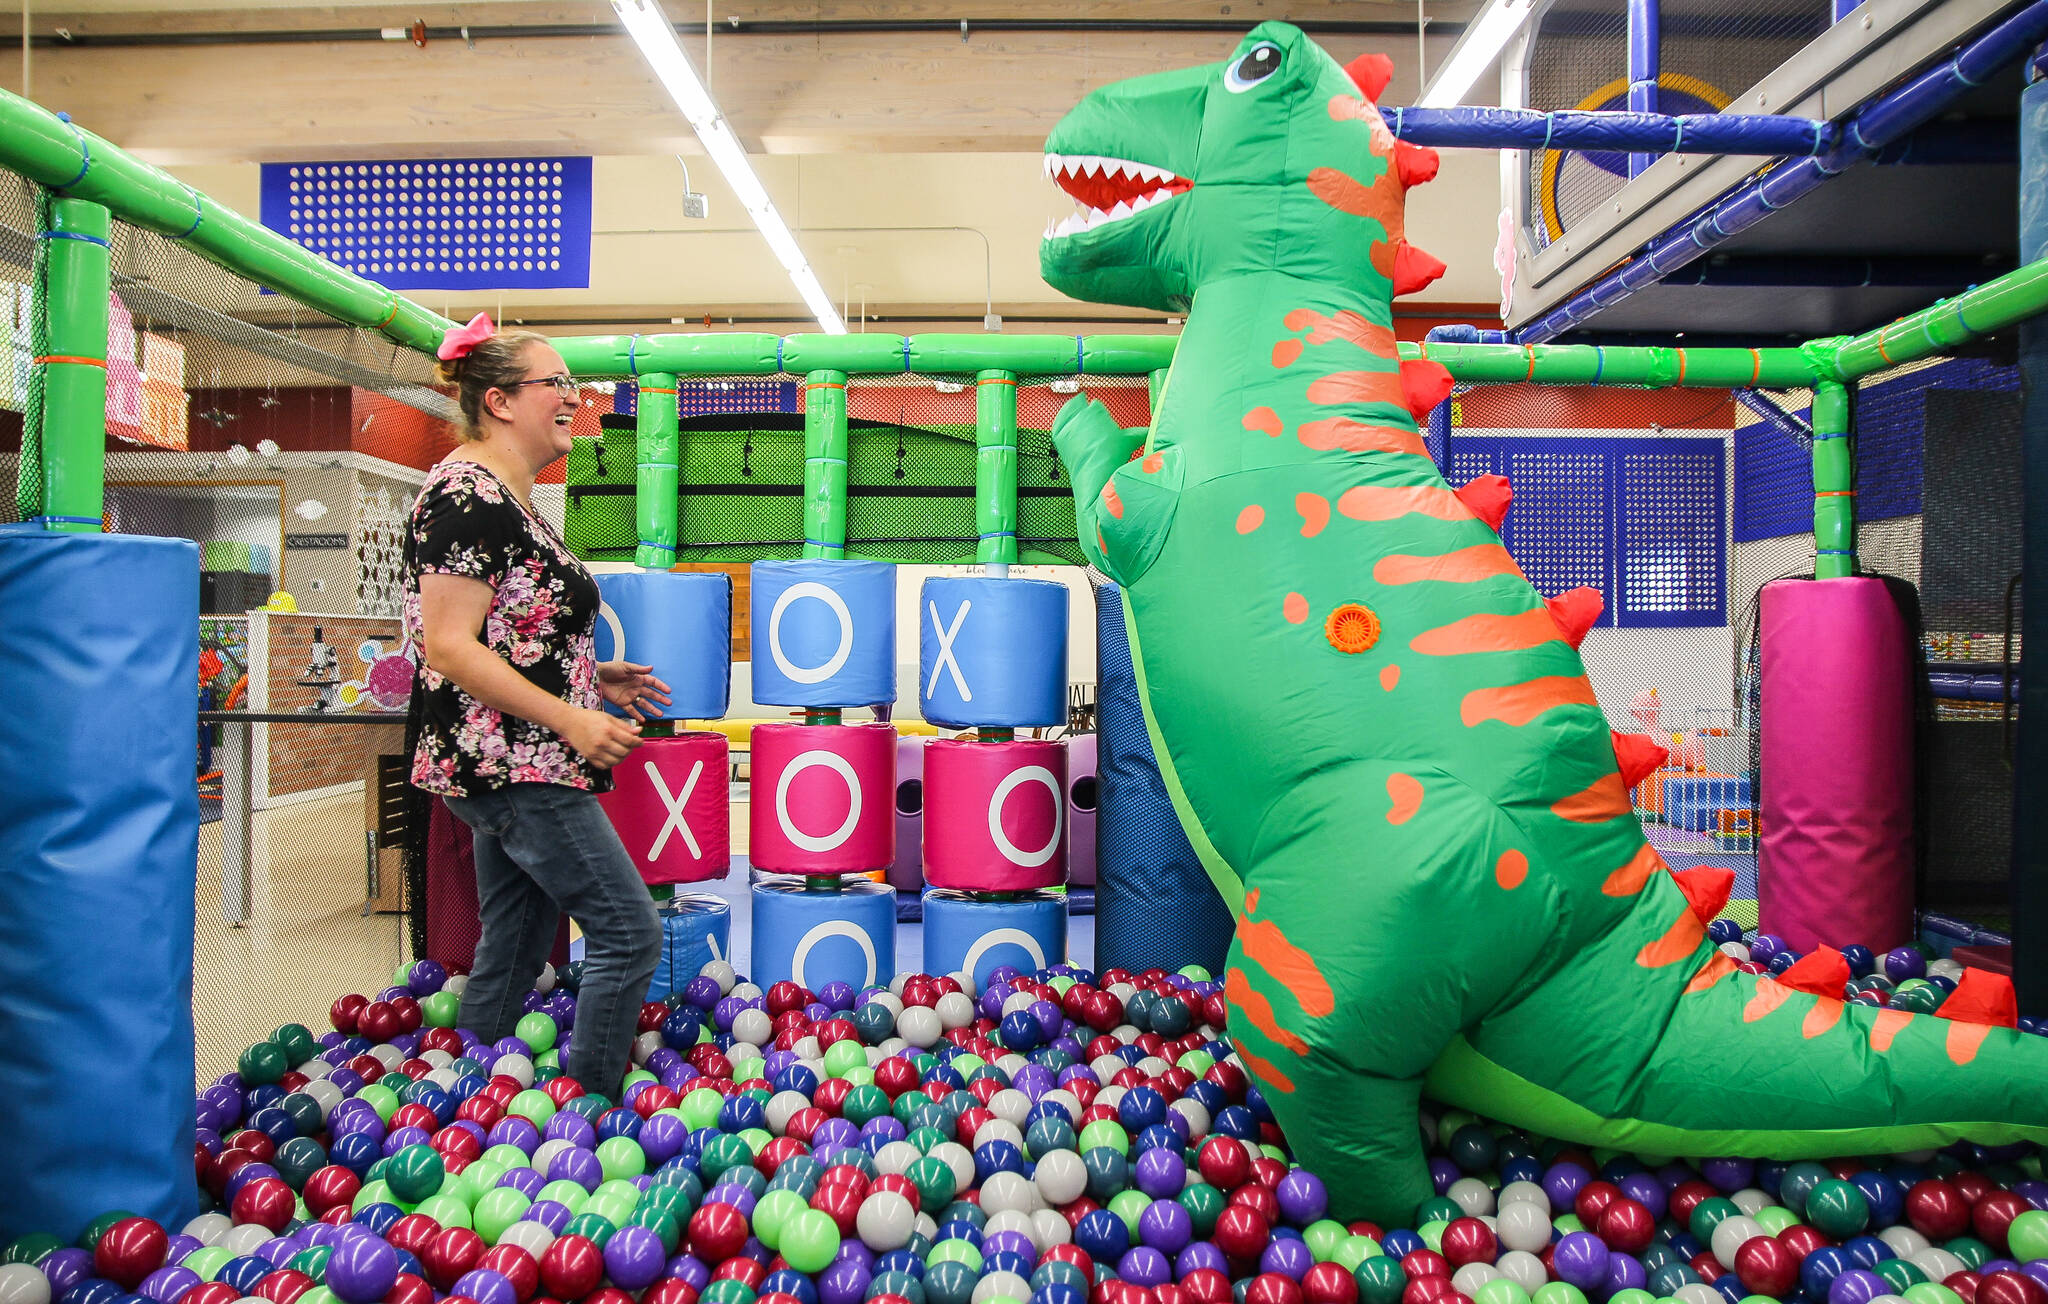 Jaylynn Sybrant plays tic tac toe with a dinosaur in the ball pit. (Photo by Luisa Loi)